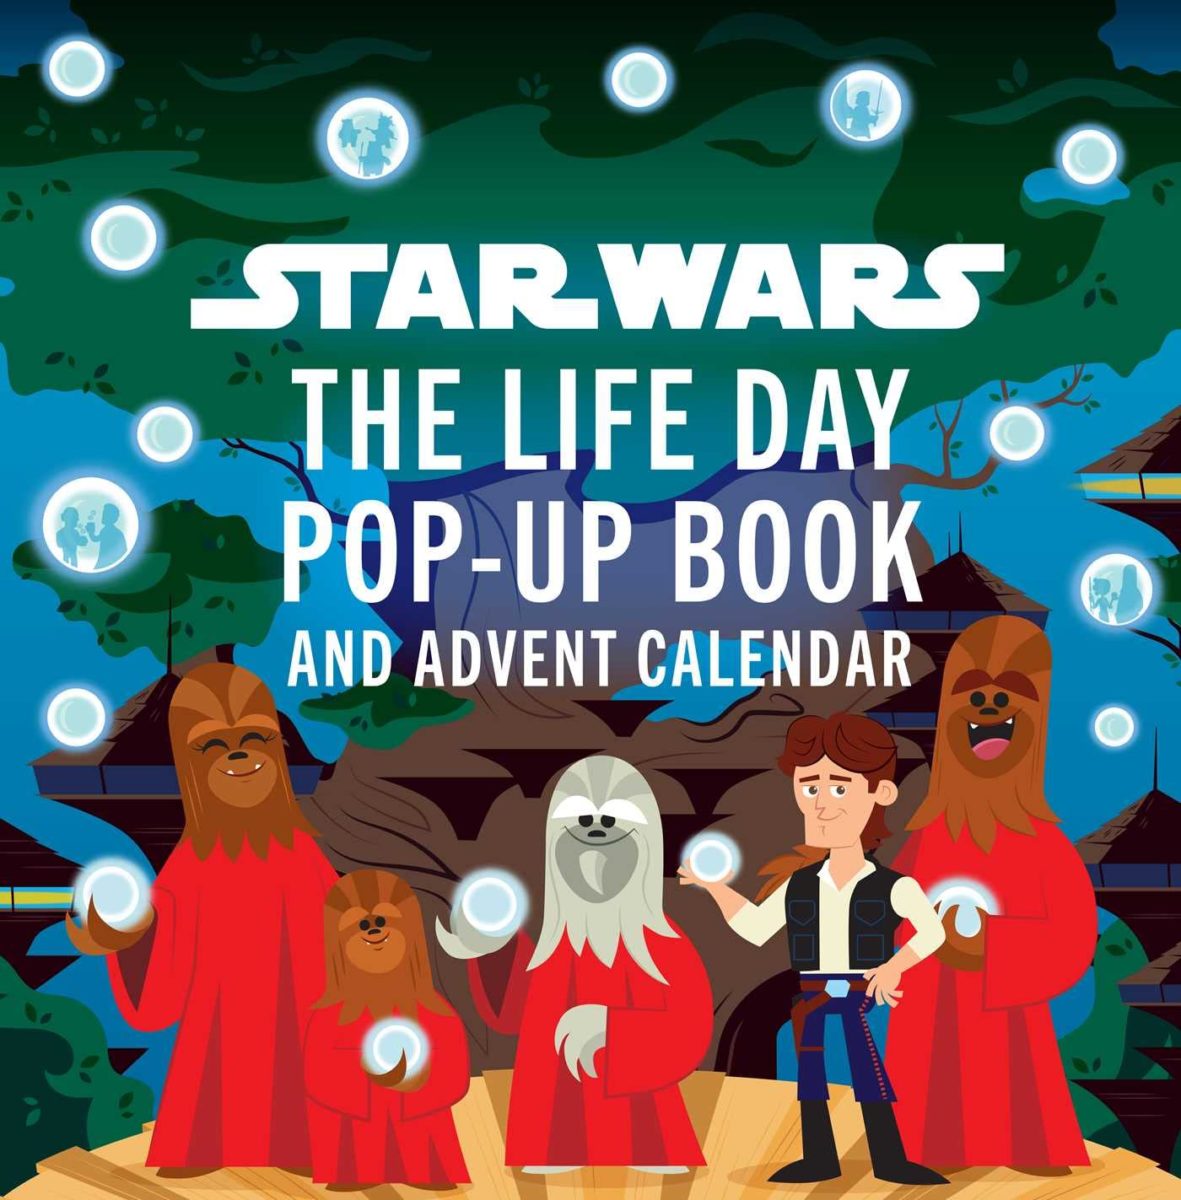 Star Wars Life Day Pop-up Book and Advent Calendar